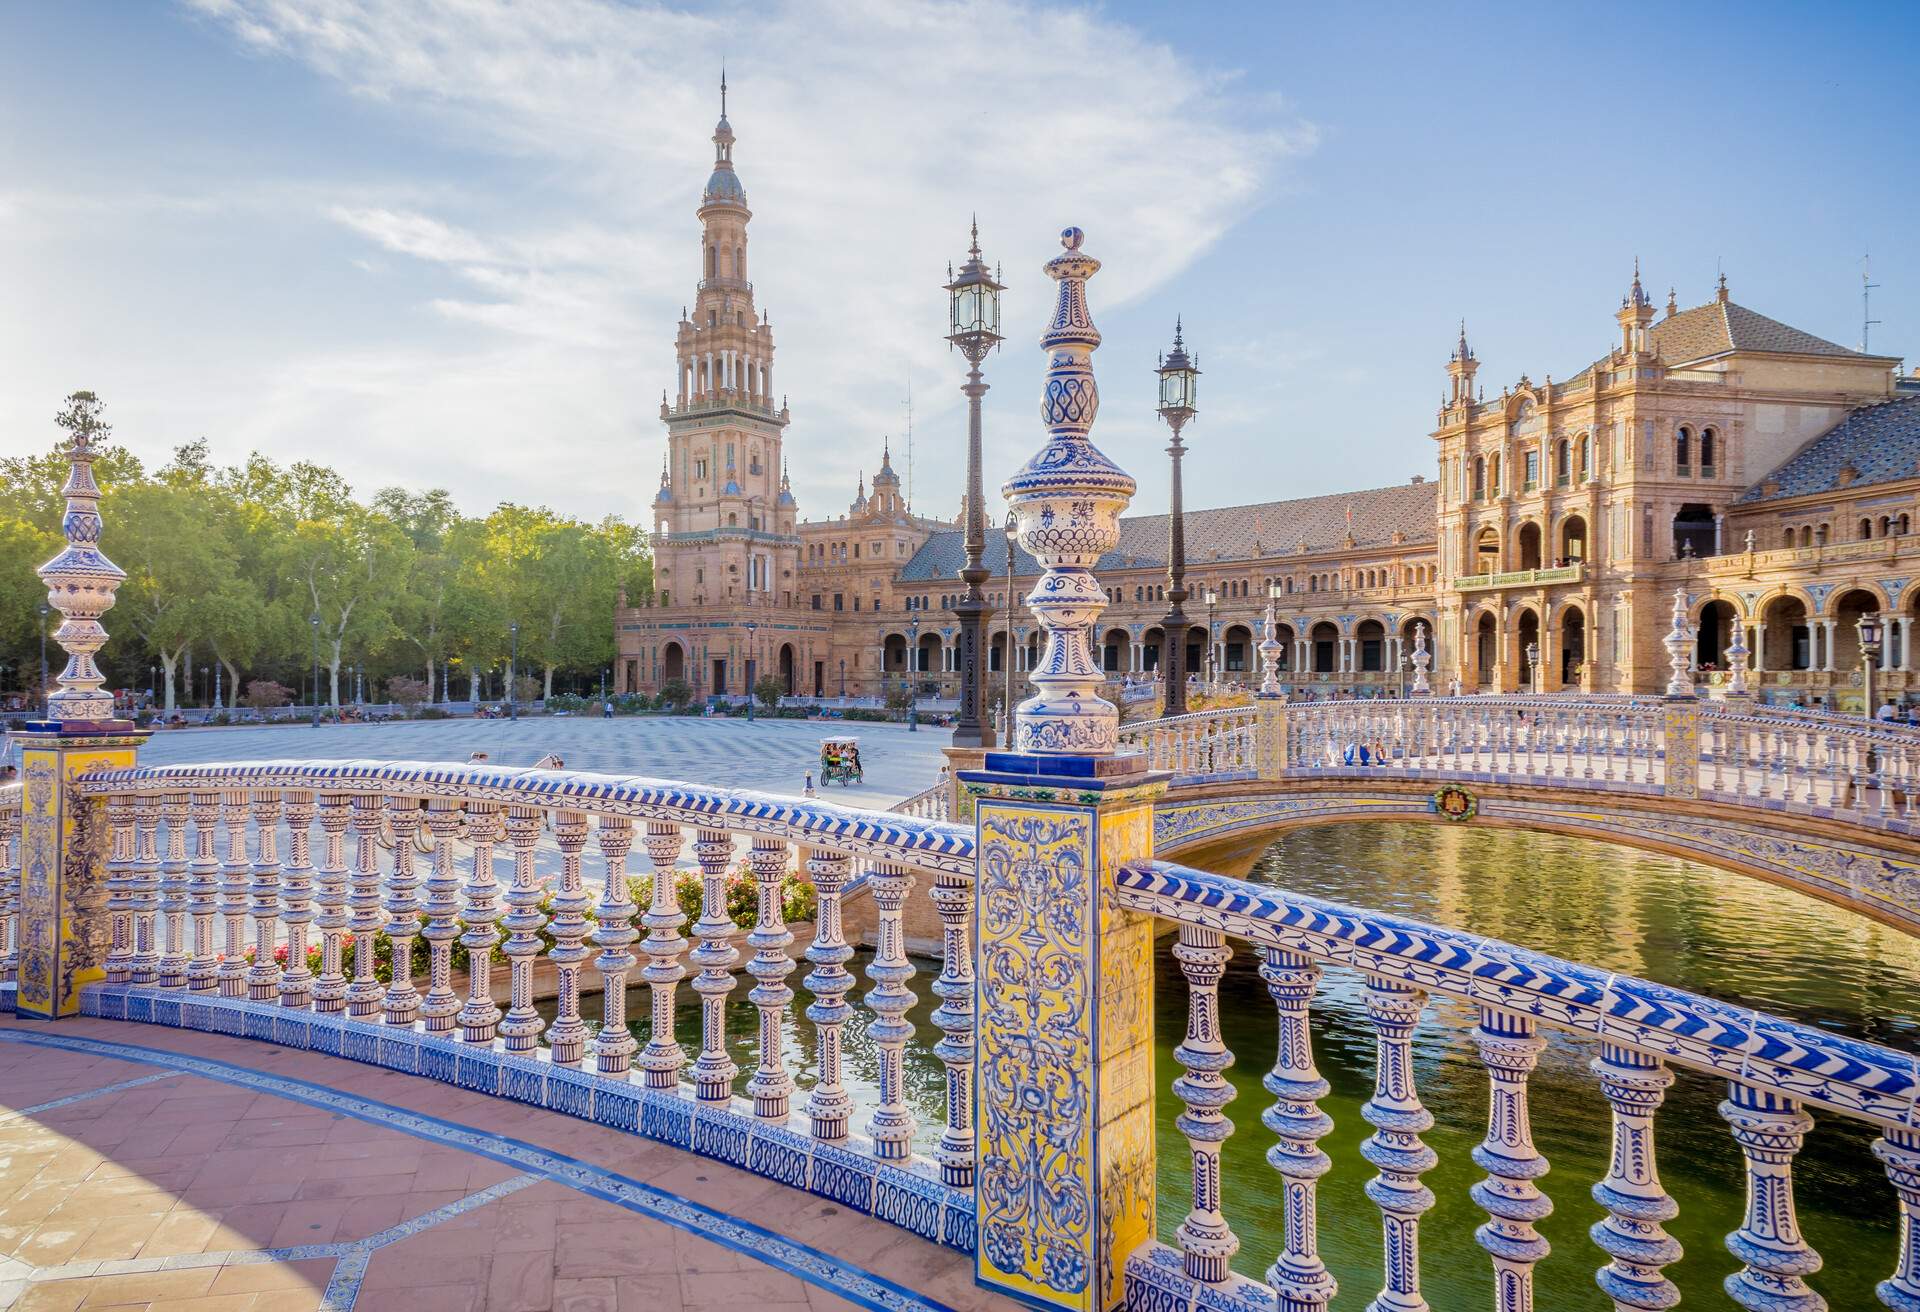 Spain Square (Plaza de Espana), Seville, Spain, built on 1928, it is one example of the Regionalism Architecture mixing Renaissance and Moorish styles.